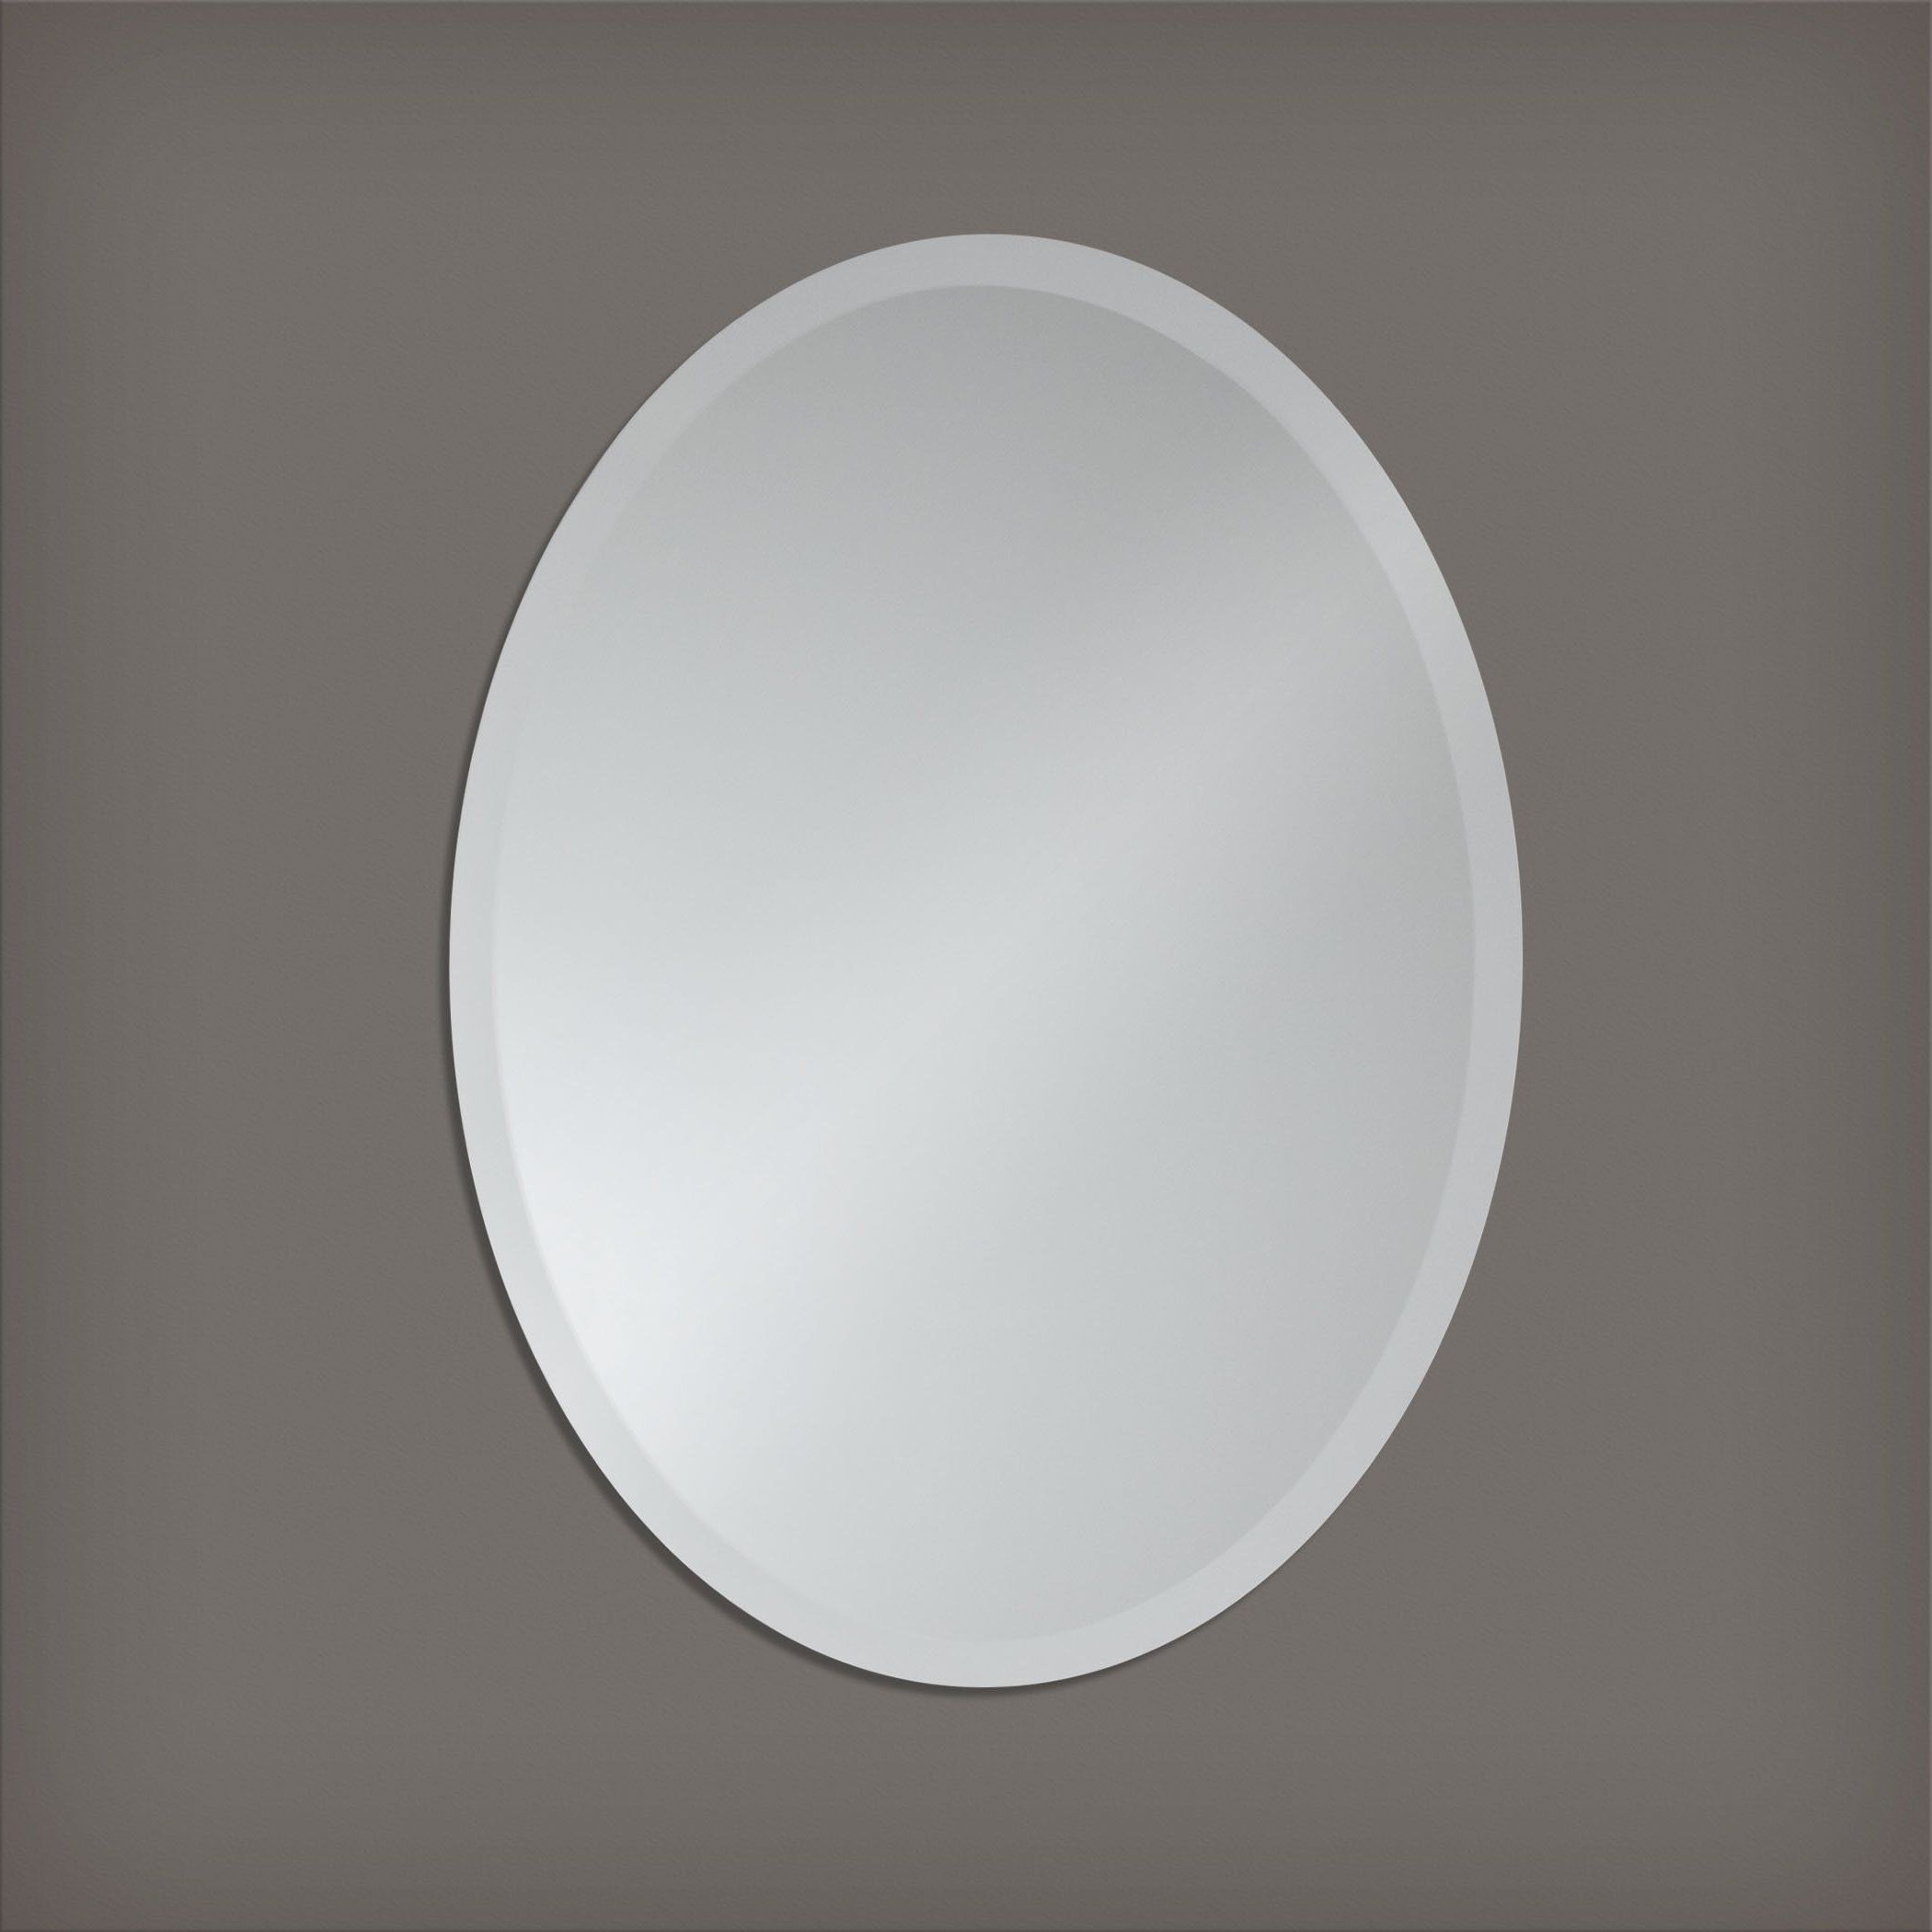 Small Frameless Beveled Oval Wall Mirror Bathroom Vanity Bedroom Mirror With Regard To Recent Oval Beveled Frameless Wall Mirrors (View 9 of 15)